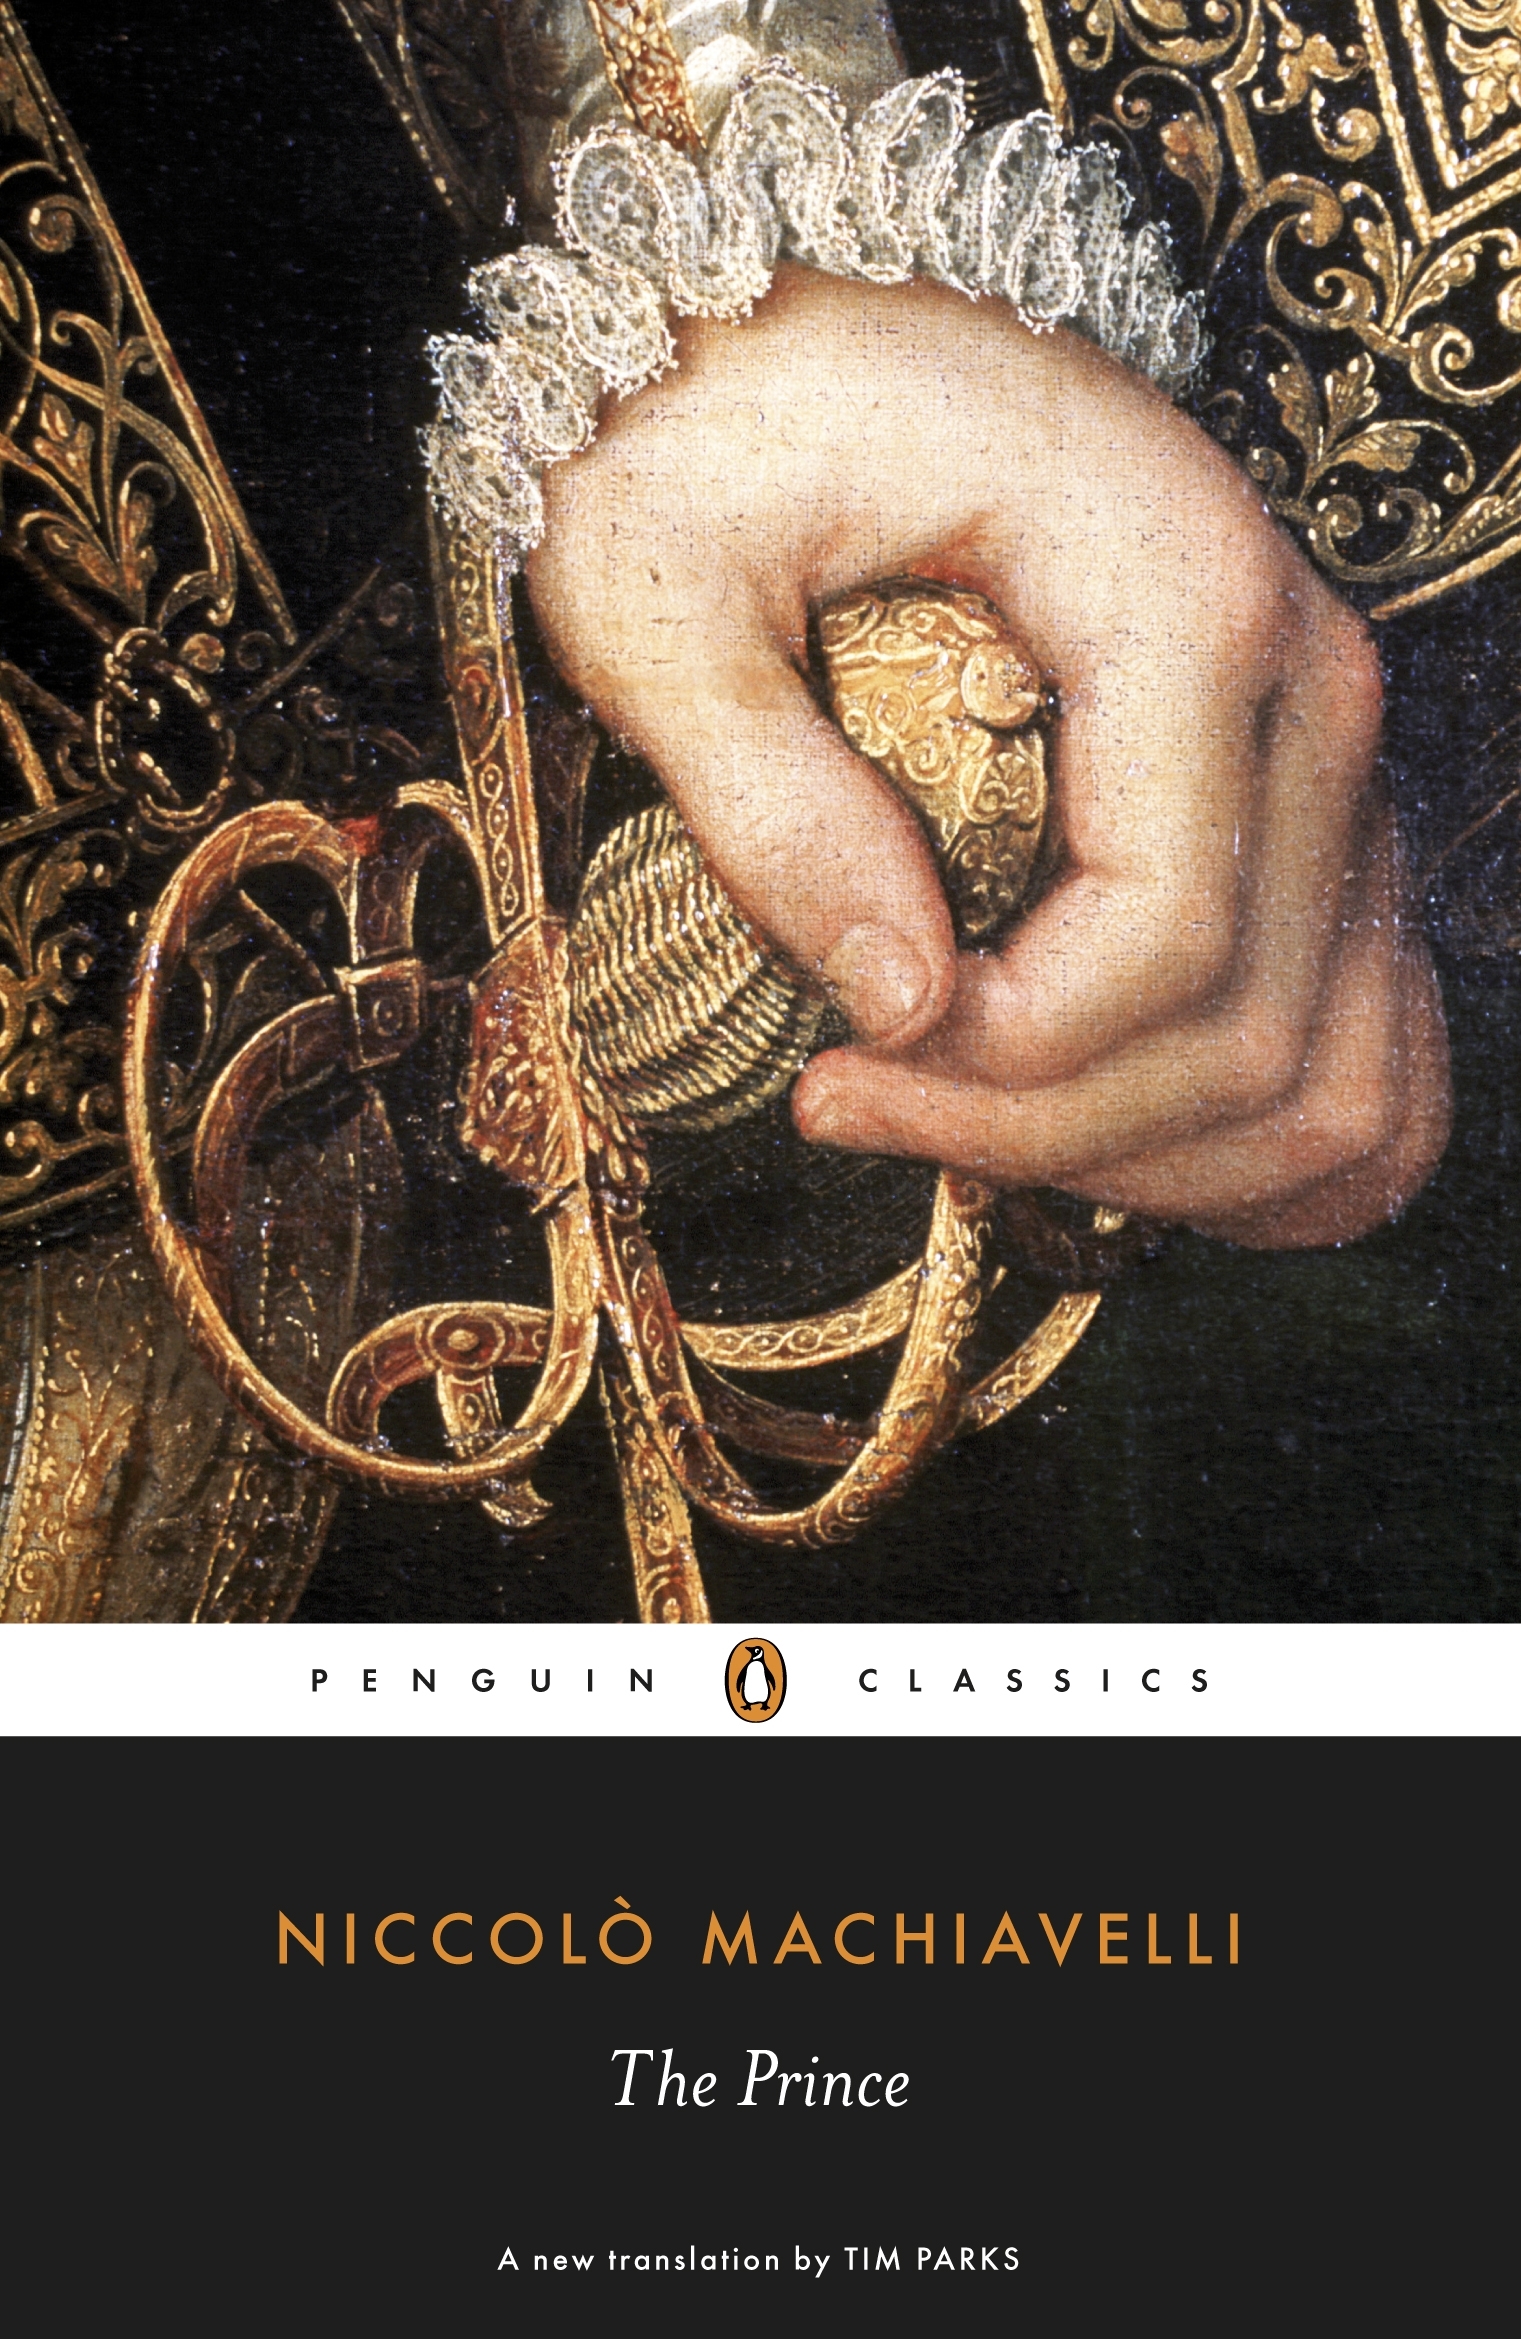 essay about the prince by machiavelli